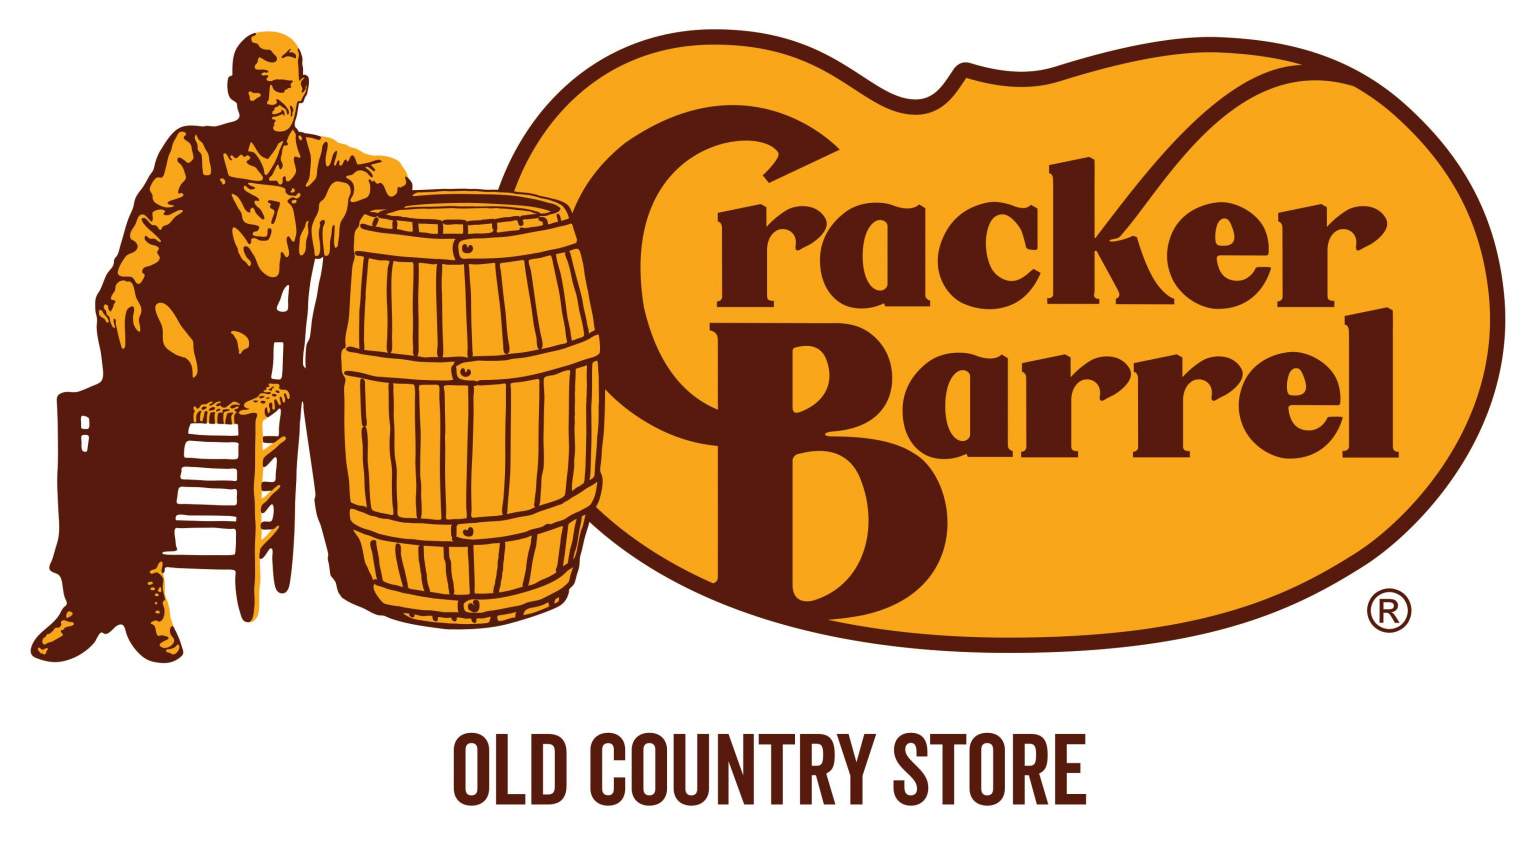 People Are Calling Out The Cracker Barrel Logo, But Here's The Real